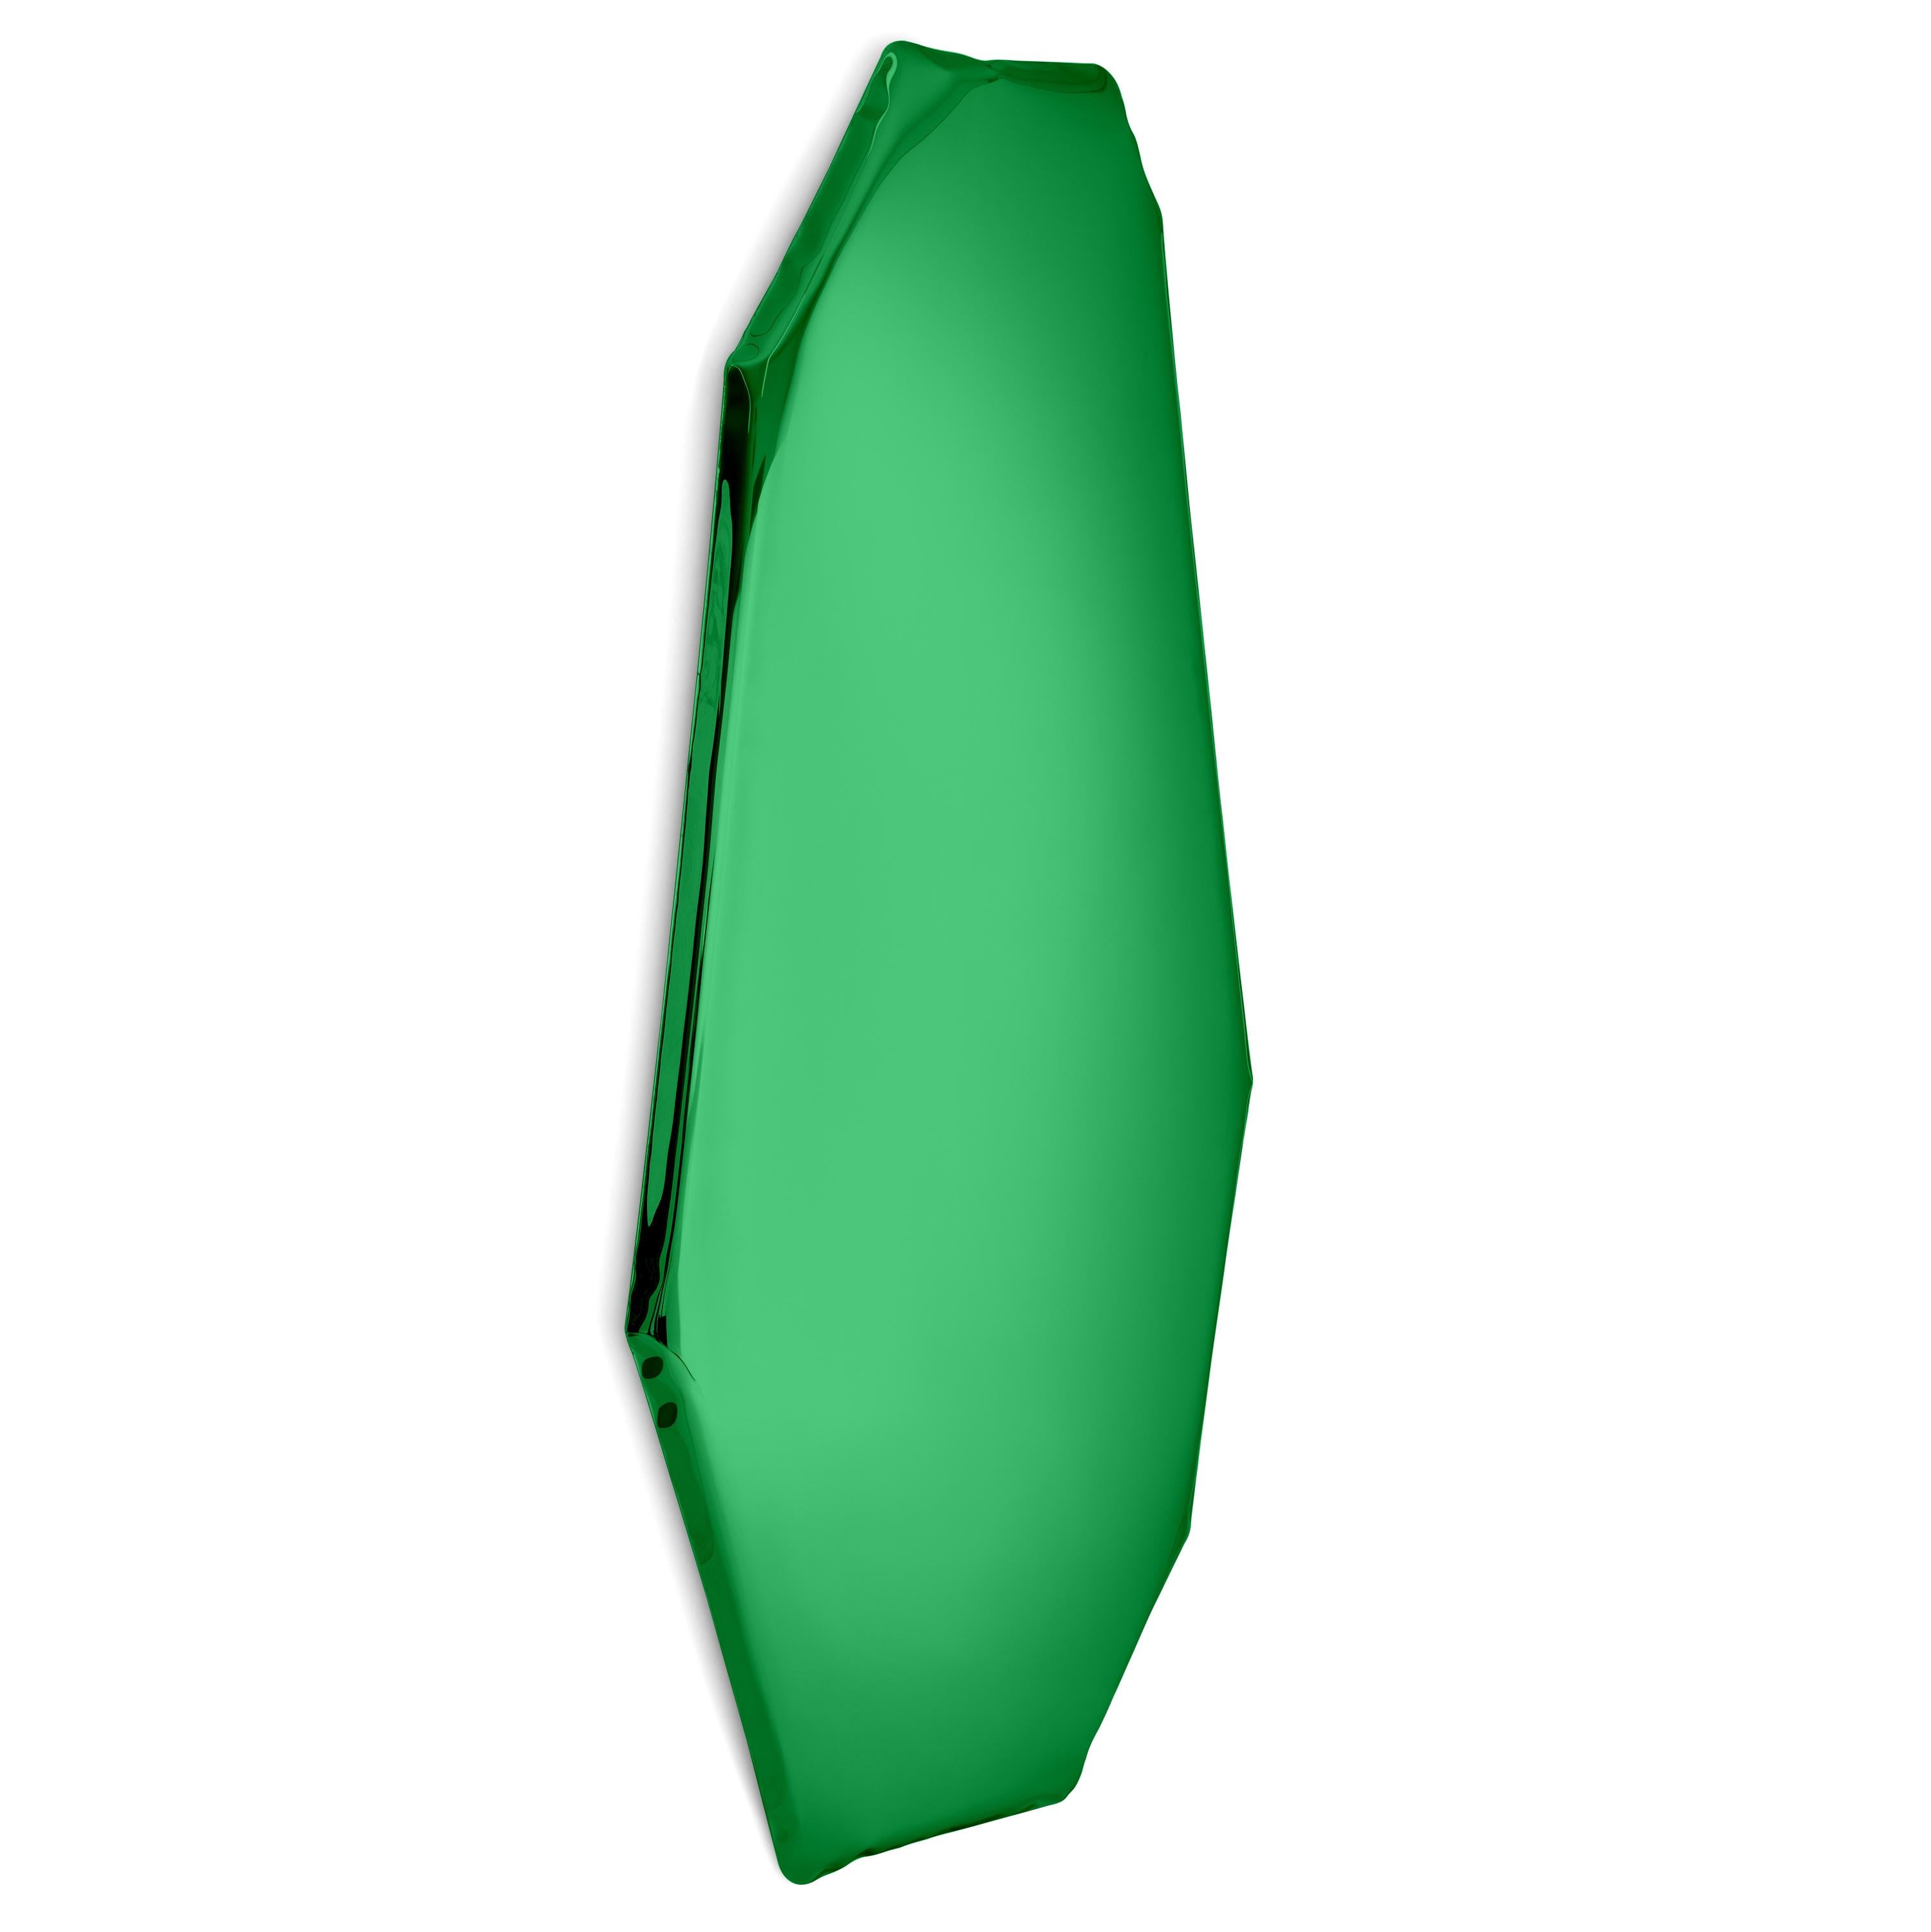 Emerald C1 sculptural wall mirror by Zieta
Dimensions: D 6 x W 99 x H 225 cm 
Material: Stainless steel. 
Finish: Emerald.
Available in finishes: Stainless Steel, Deep Space Blue, Emerald, Saphire, Saphire/Emerald, Dark Matter, and Red Rubin. Also